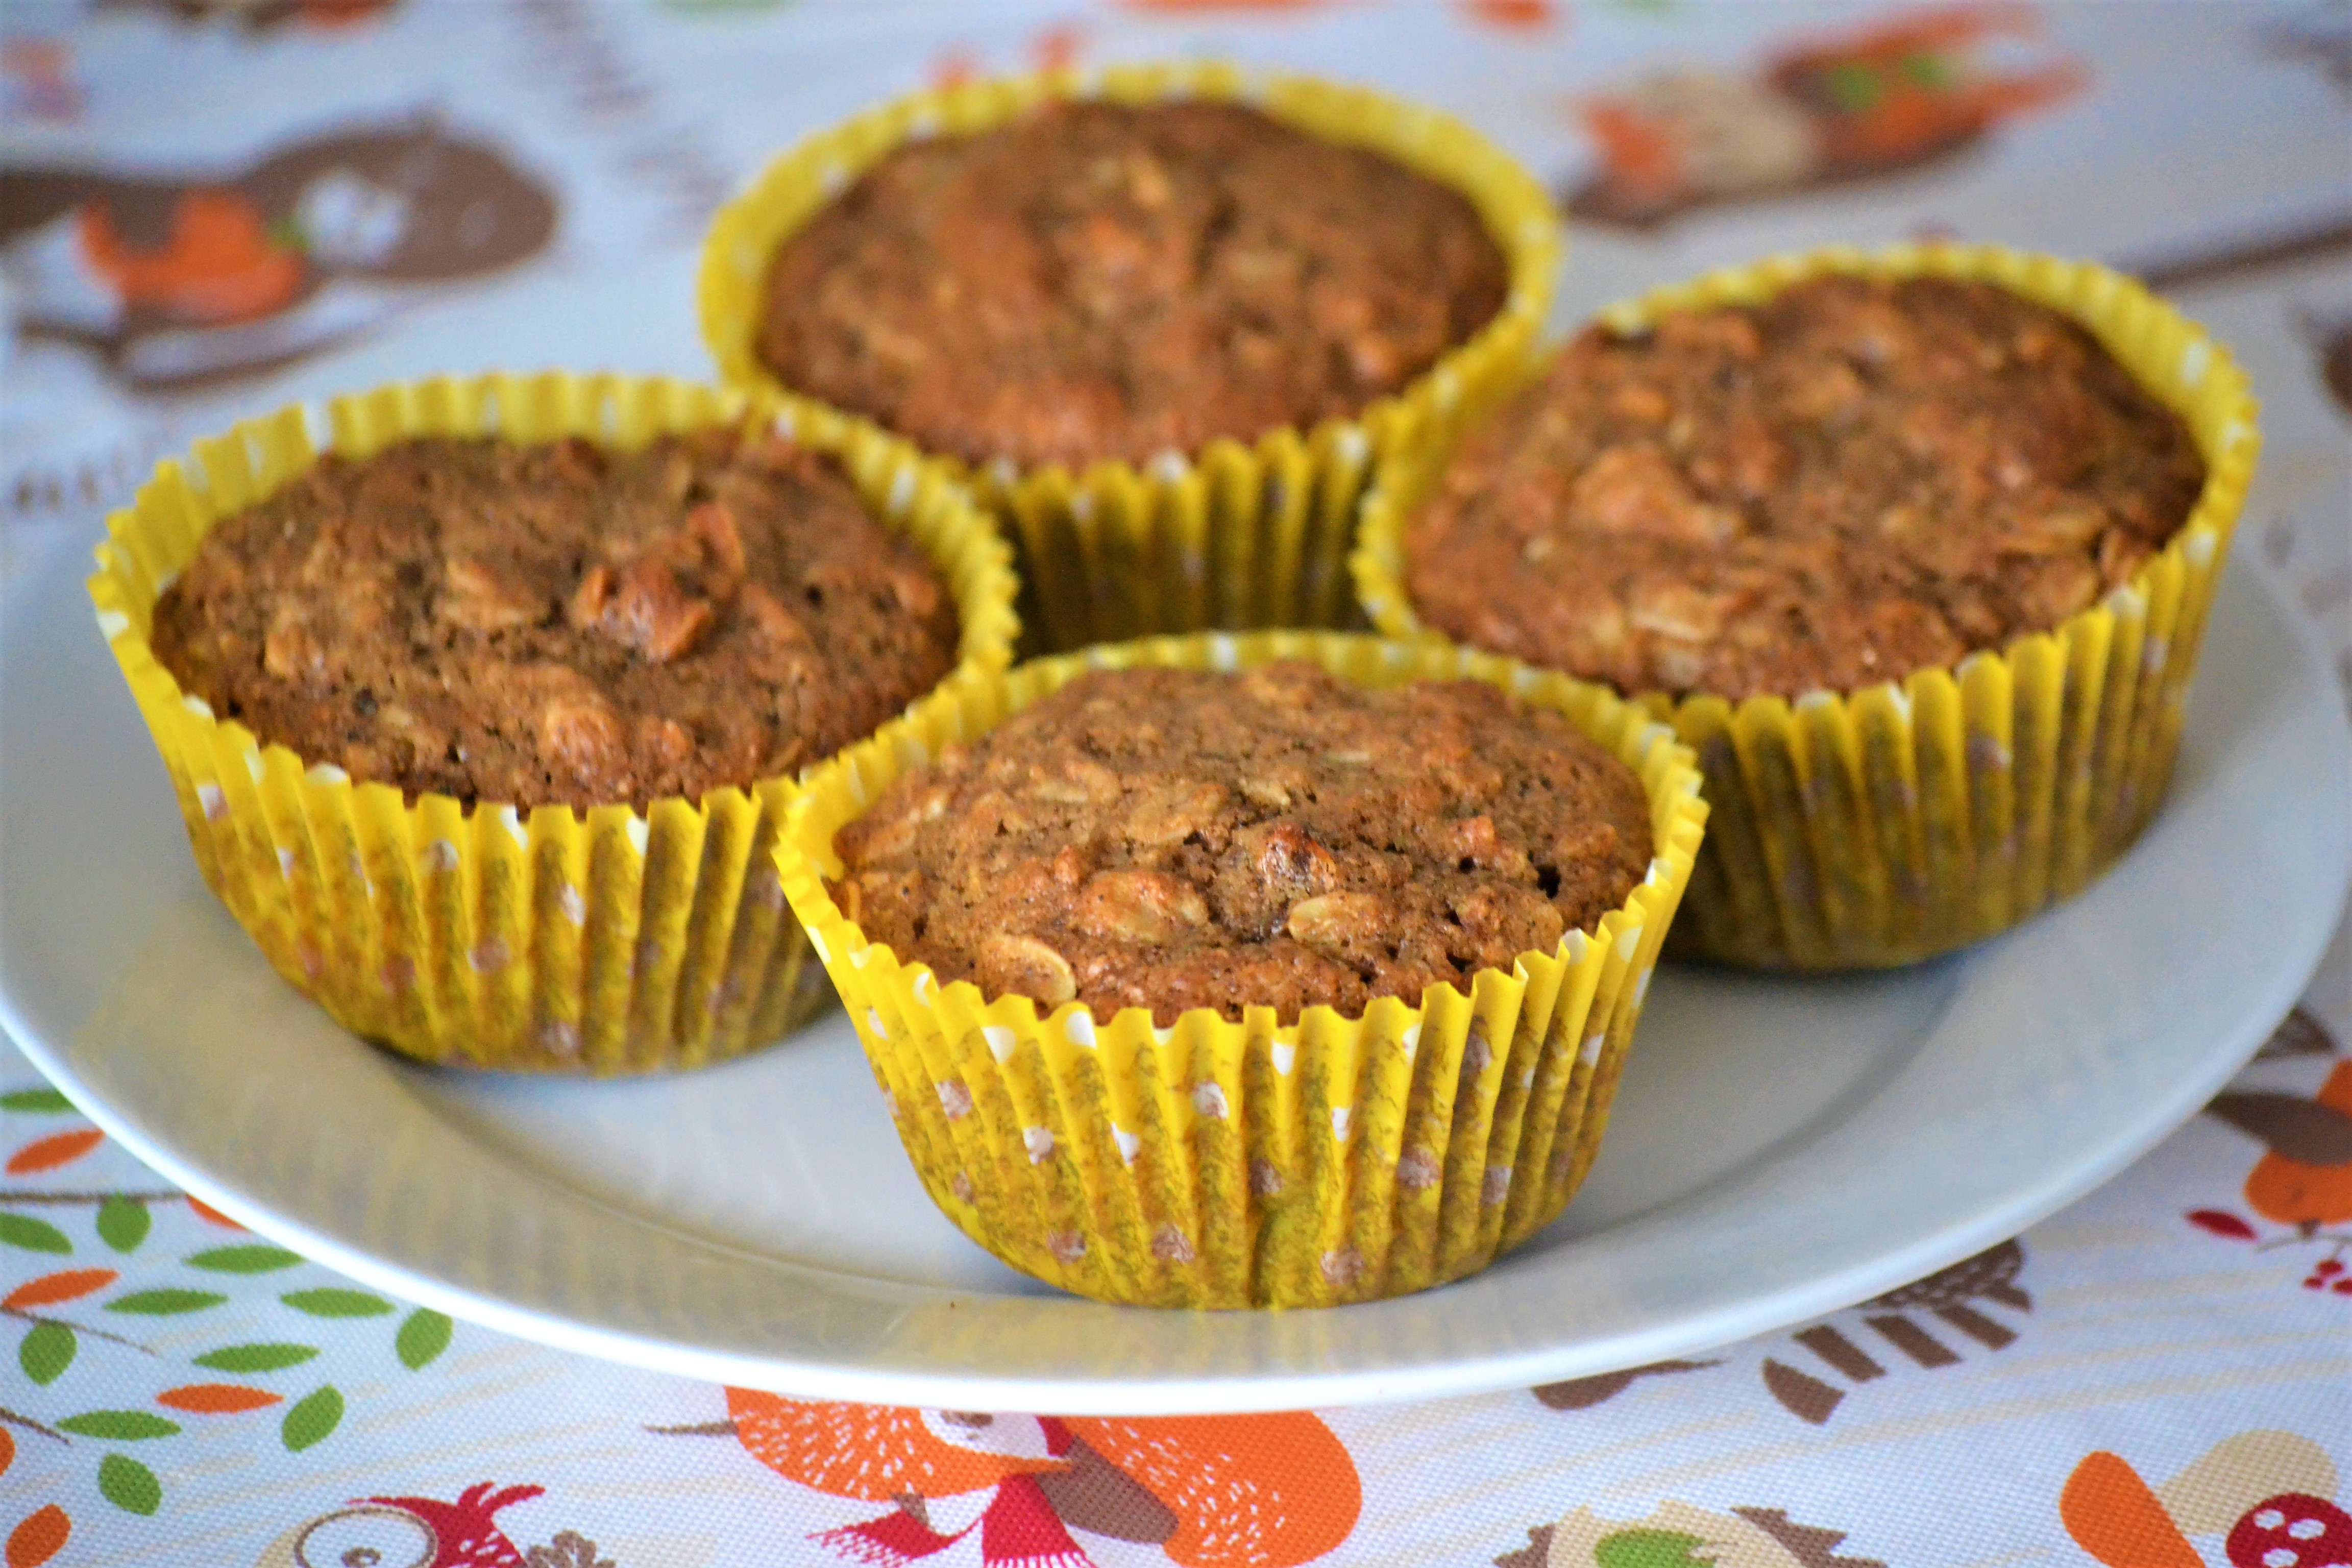 Toasted Oat Muffins with Apricots, Dates, and Walnuts